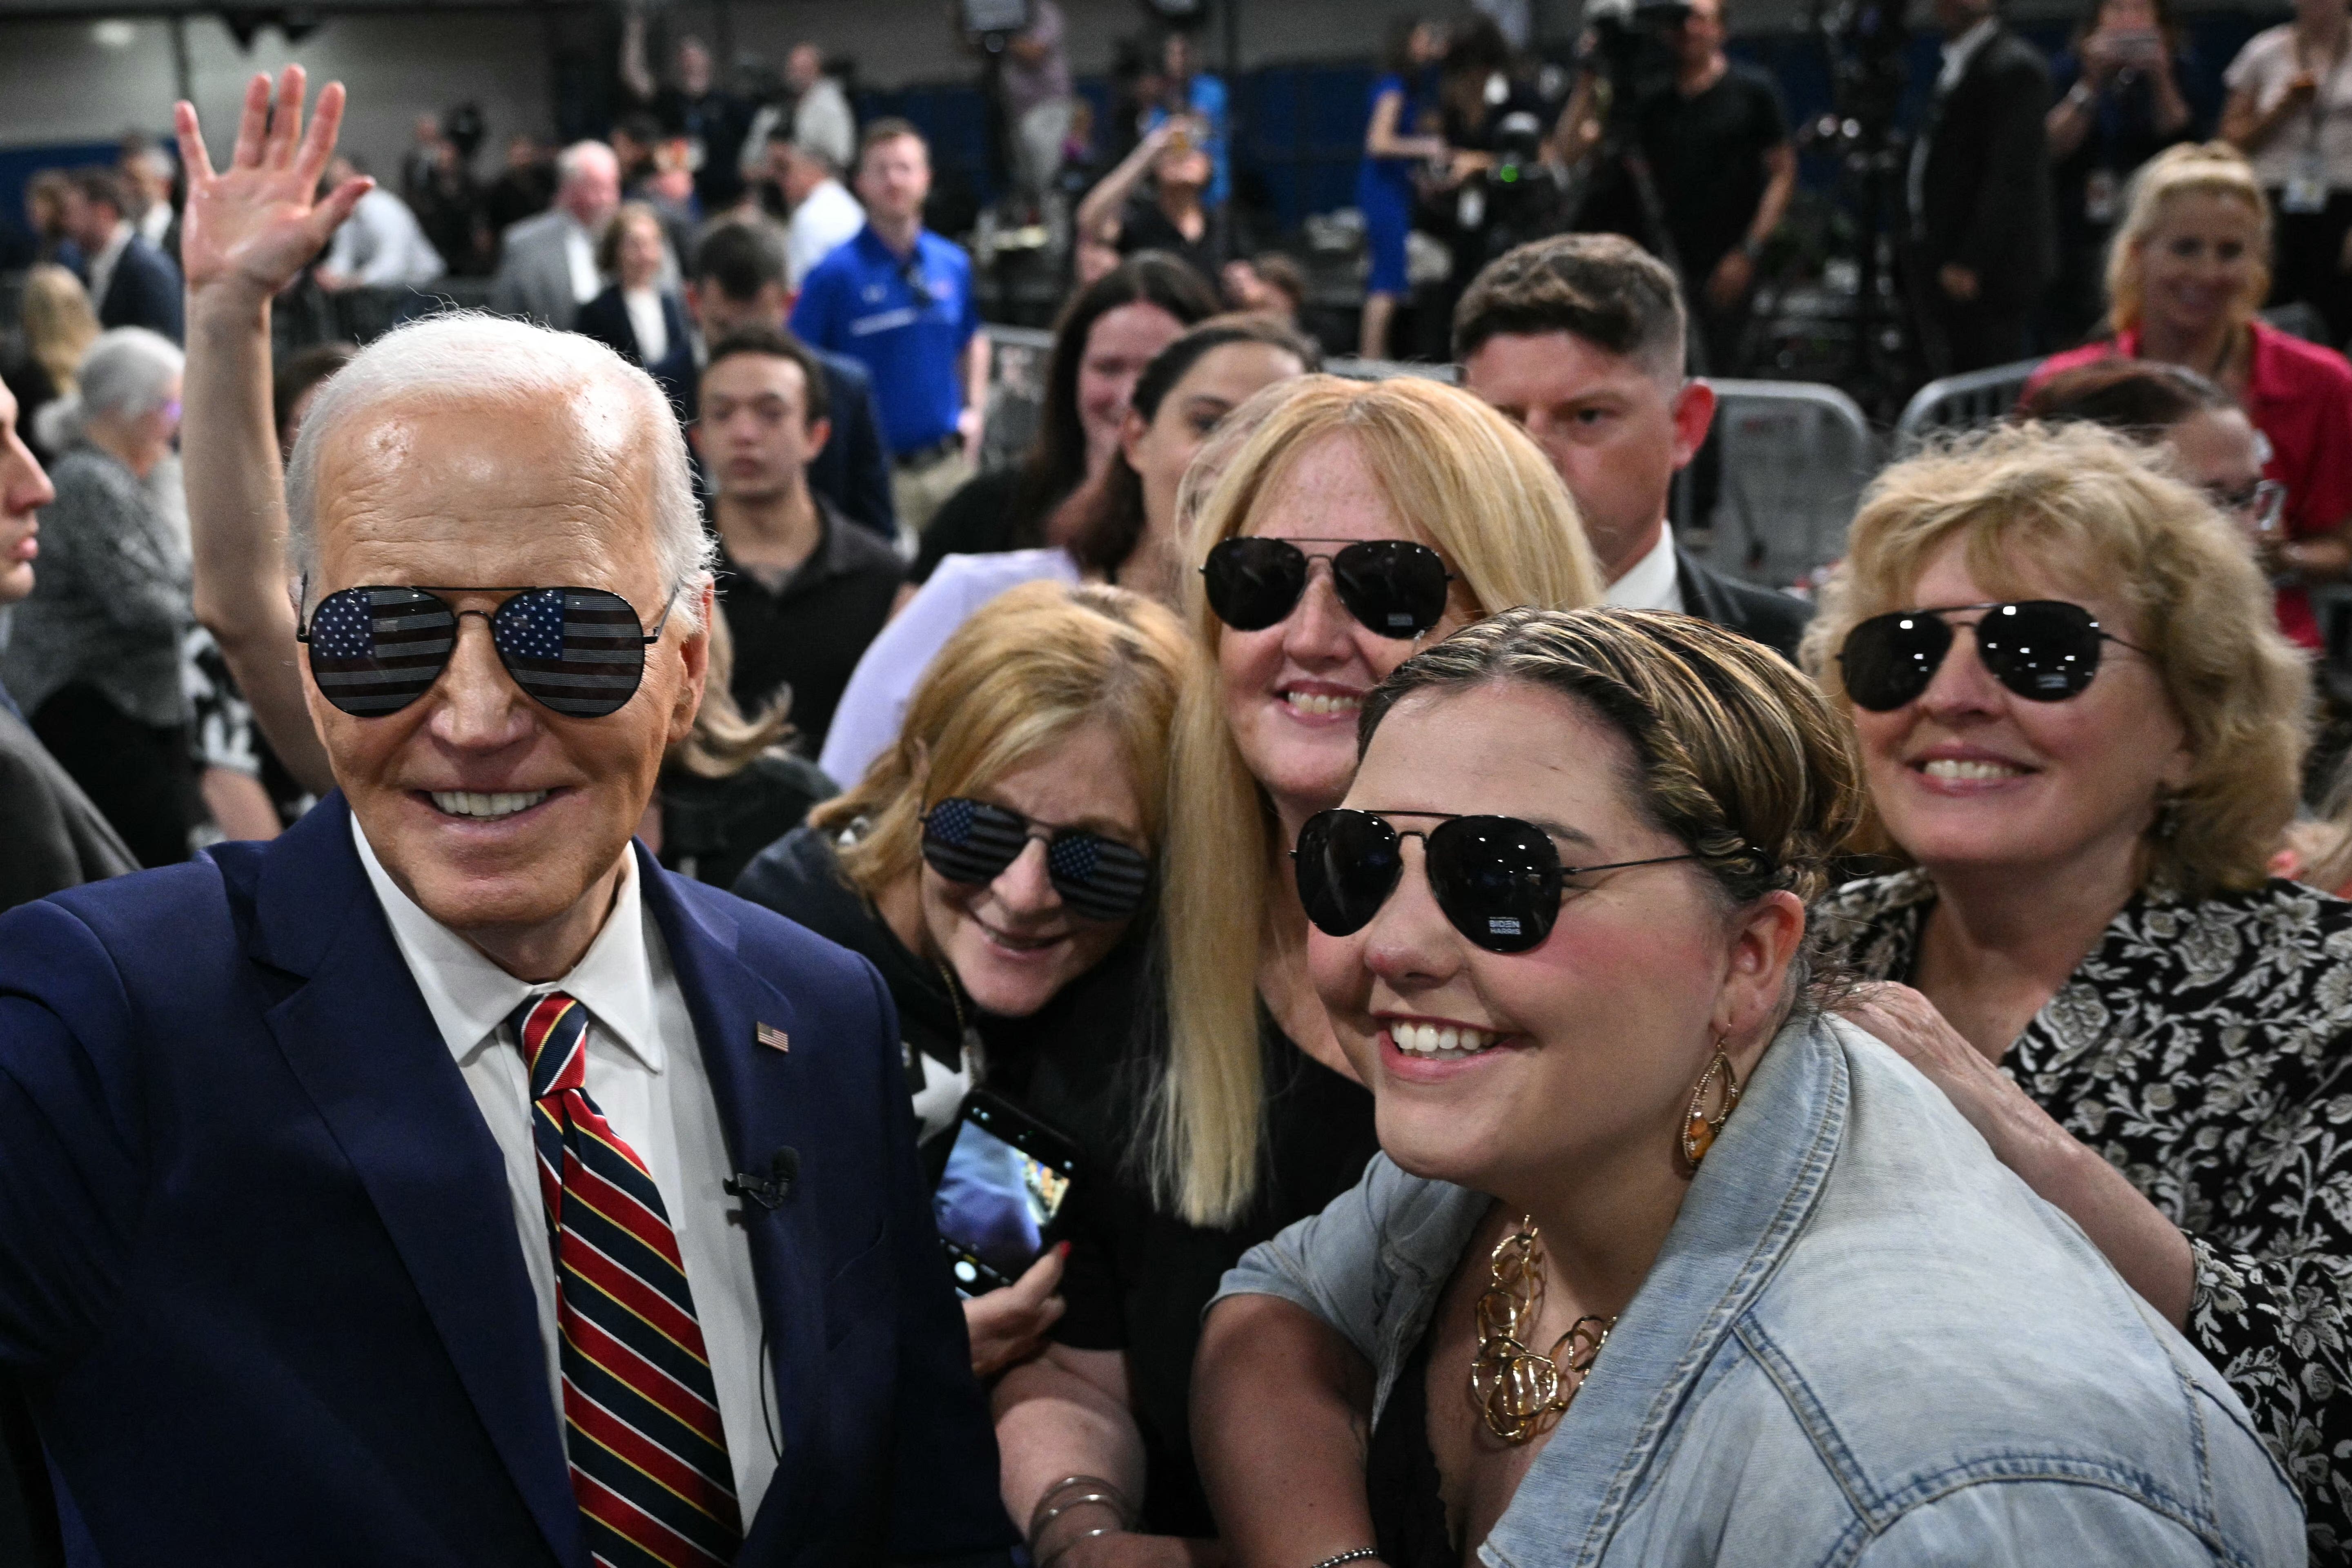 Explained: Why might President Biden not be on the Ohio Ballot?